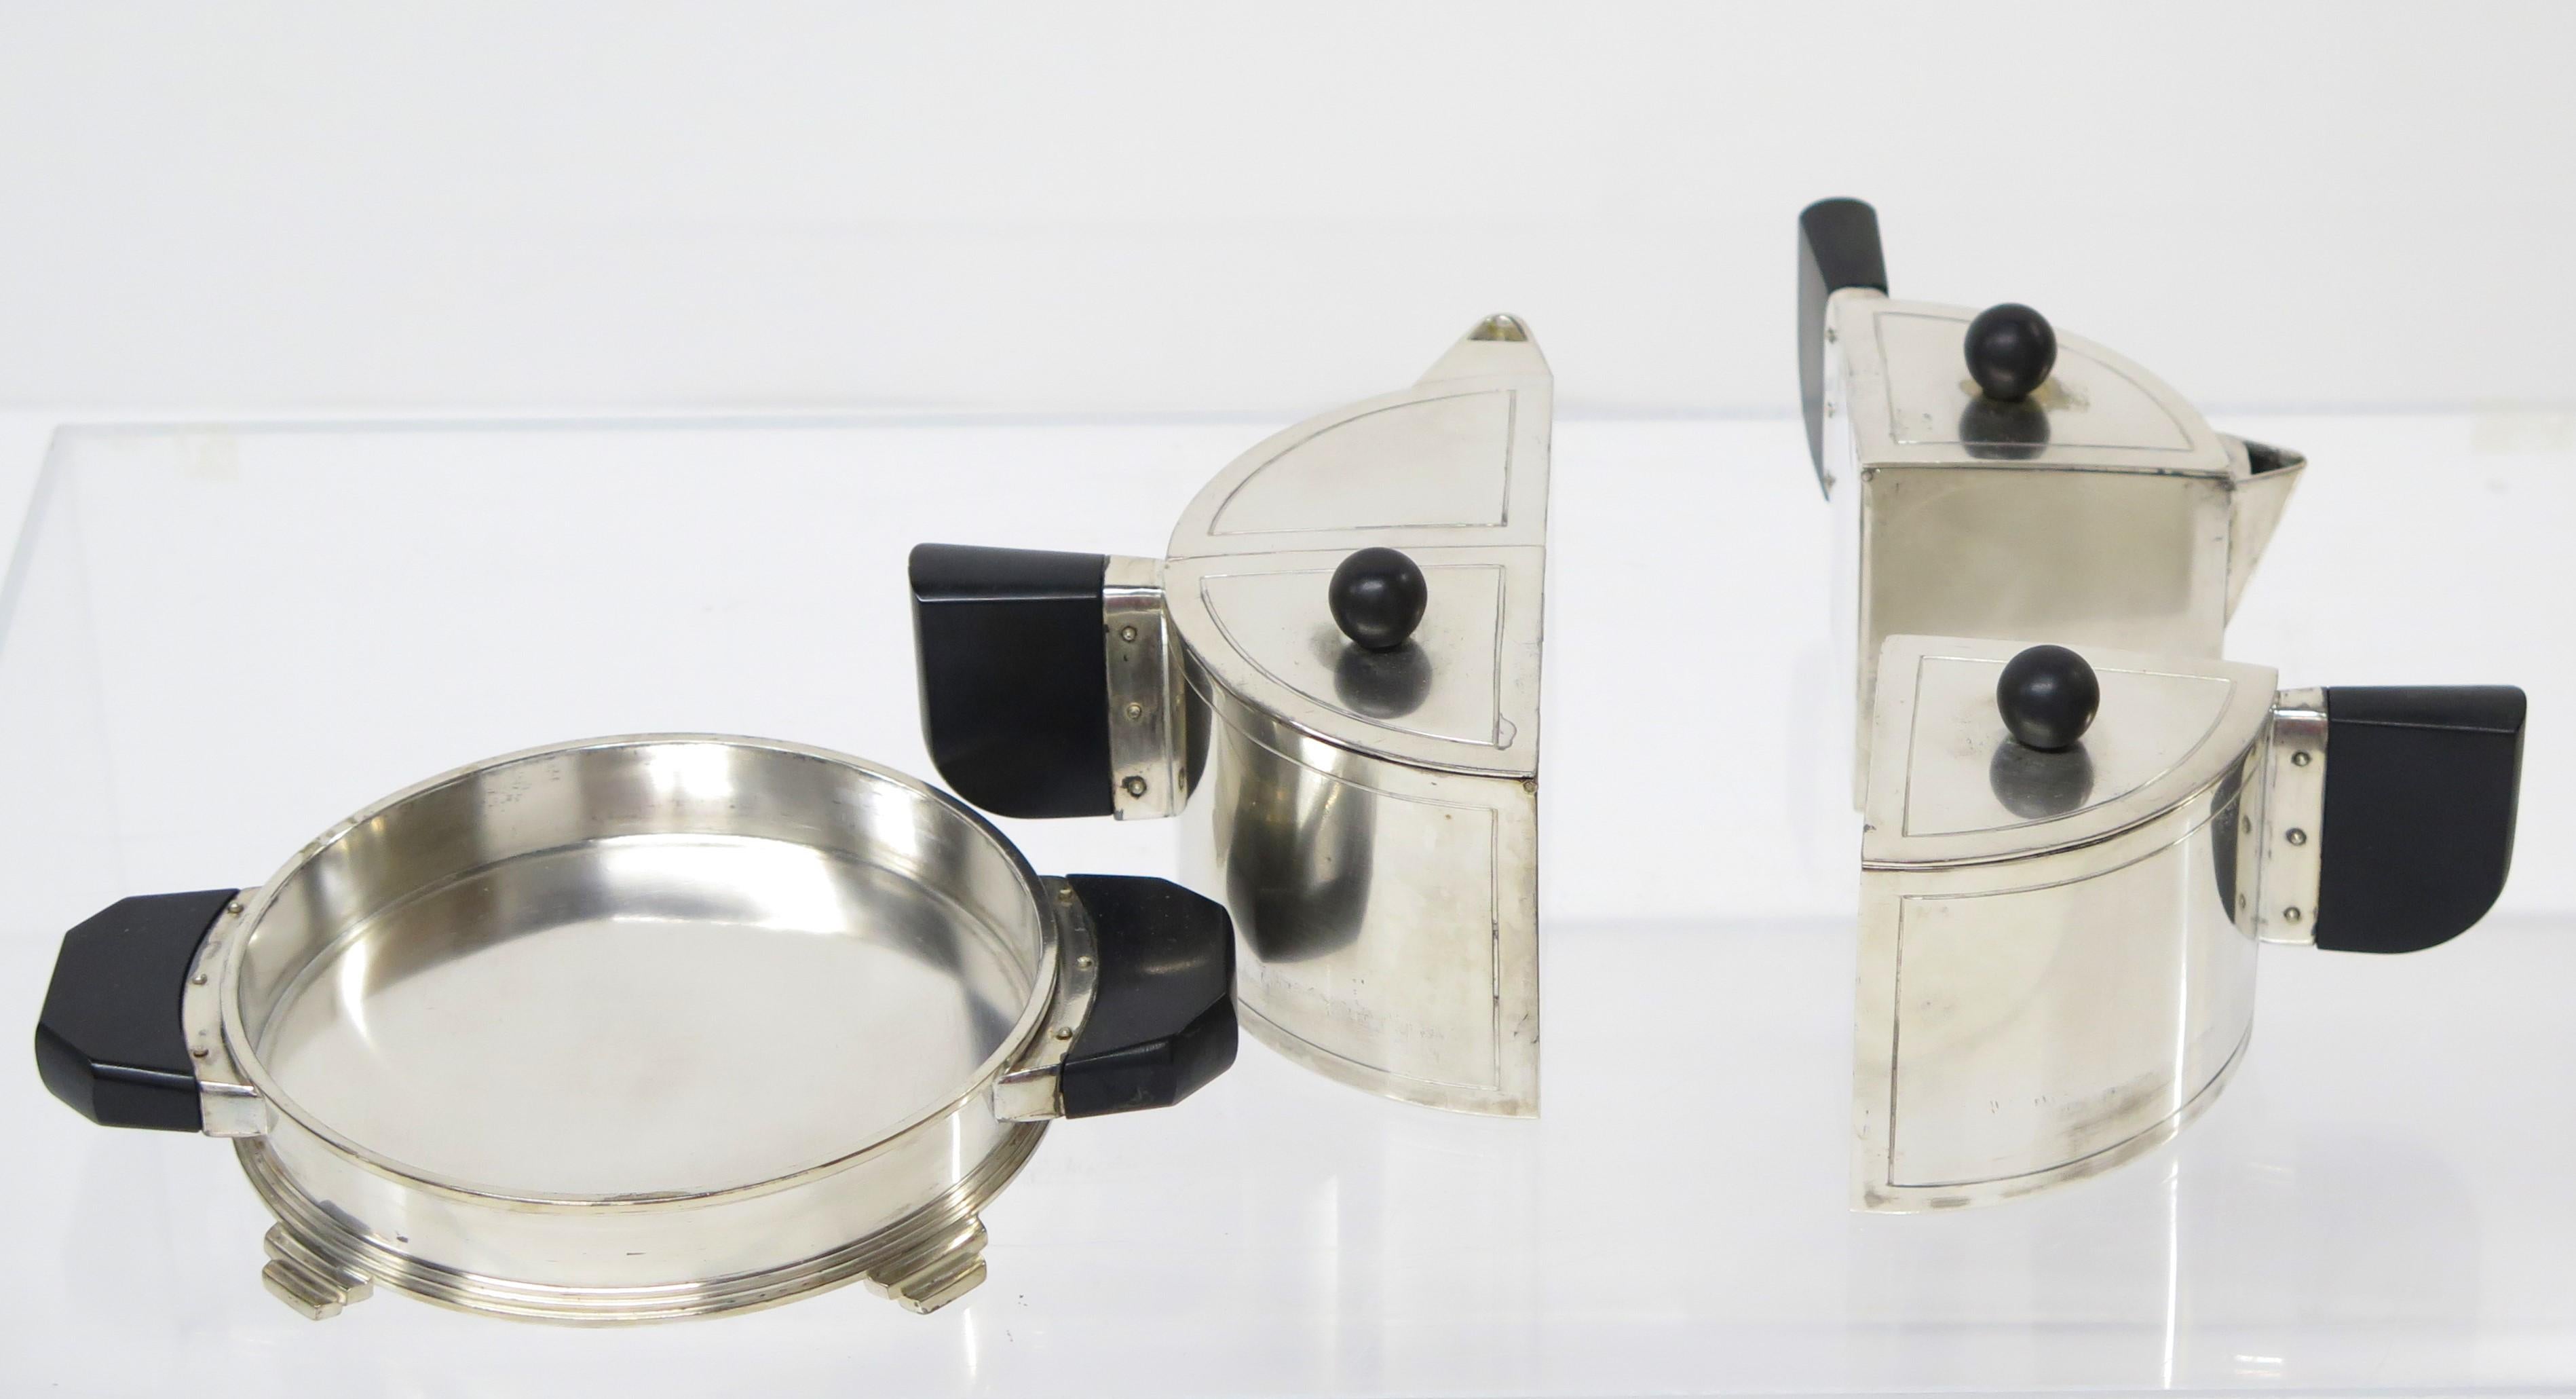 Art Deco Tea Set by Jean Theobald for Wilcox Silver Plate Company, 1928 im Zustand „Gut“ im Angebot in Dallas, TX